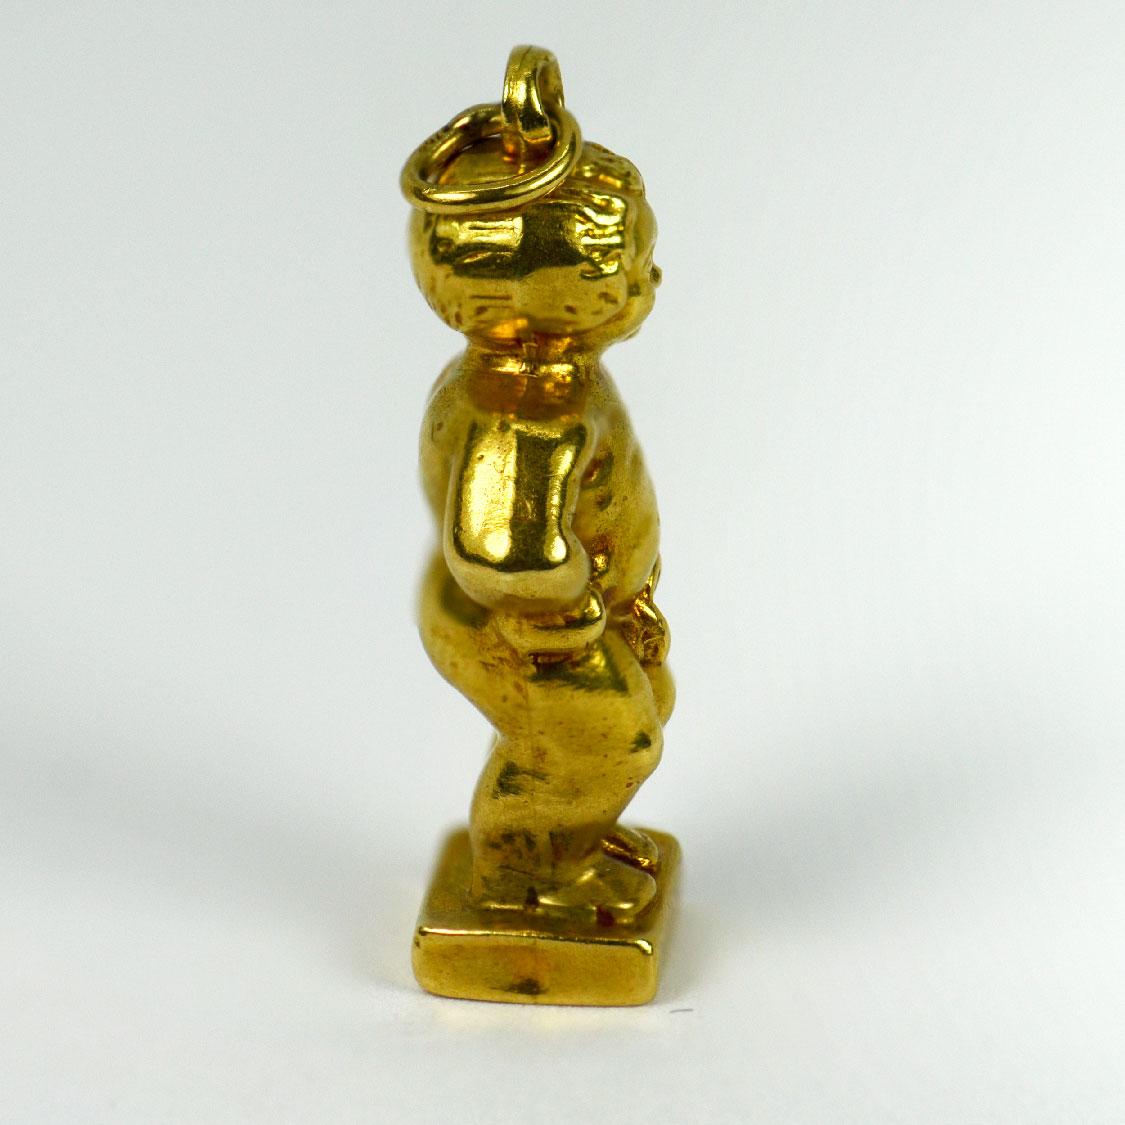  An 18 karat (18K) yellow gold charm pendant designed as the Dutch landmark, the Manneken Pis statue of Brussels. Stamped 750 with the owl mark for French import and 18 karat gold.

Dimensions: 2.5 x 1 x 0.6 cm (not including jump ring)
Weight: 2.19